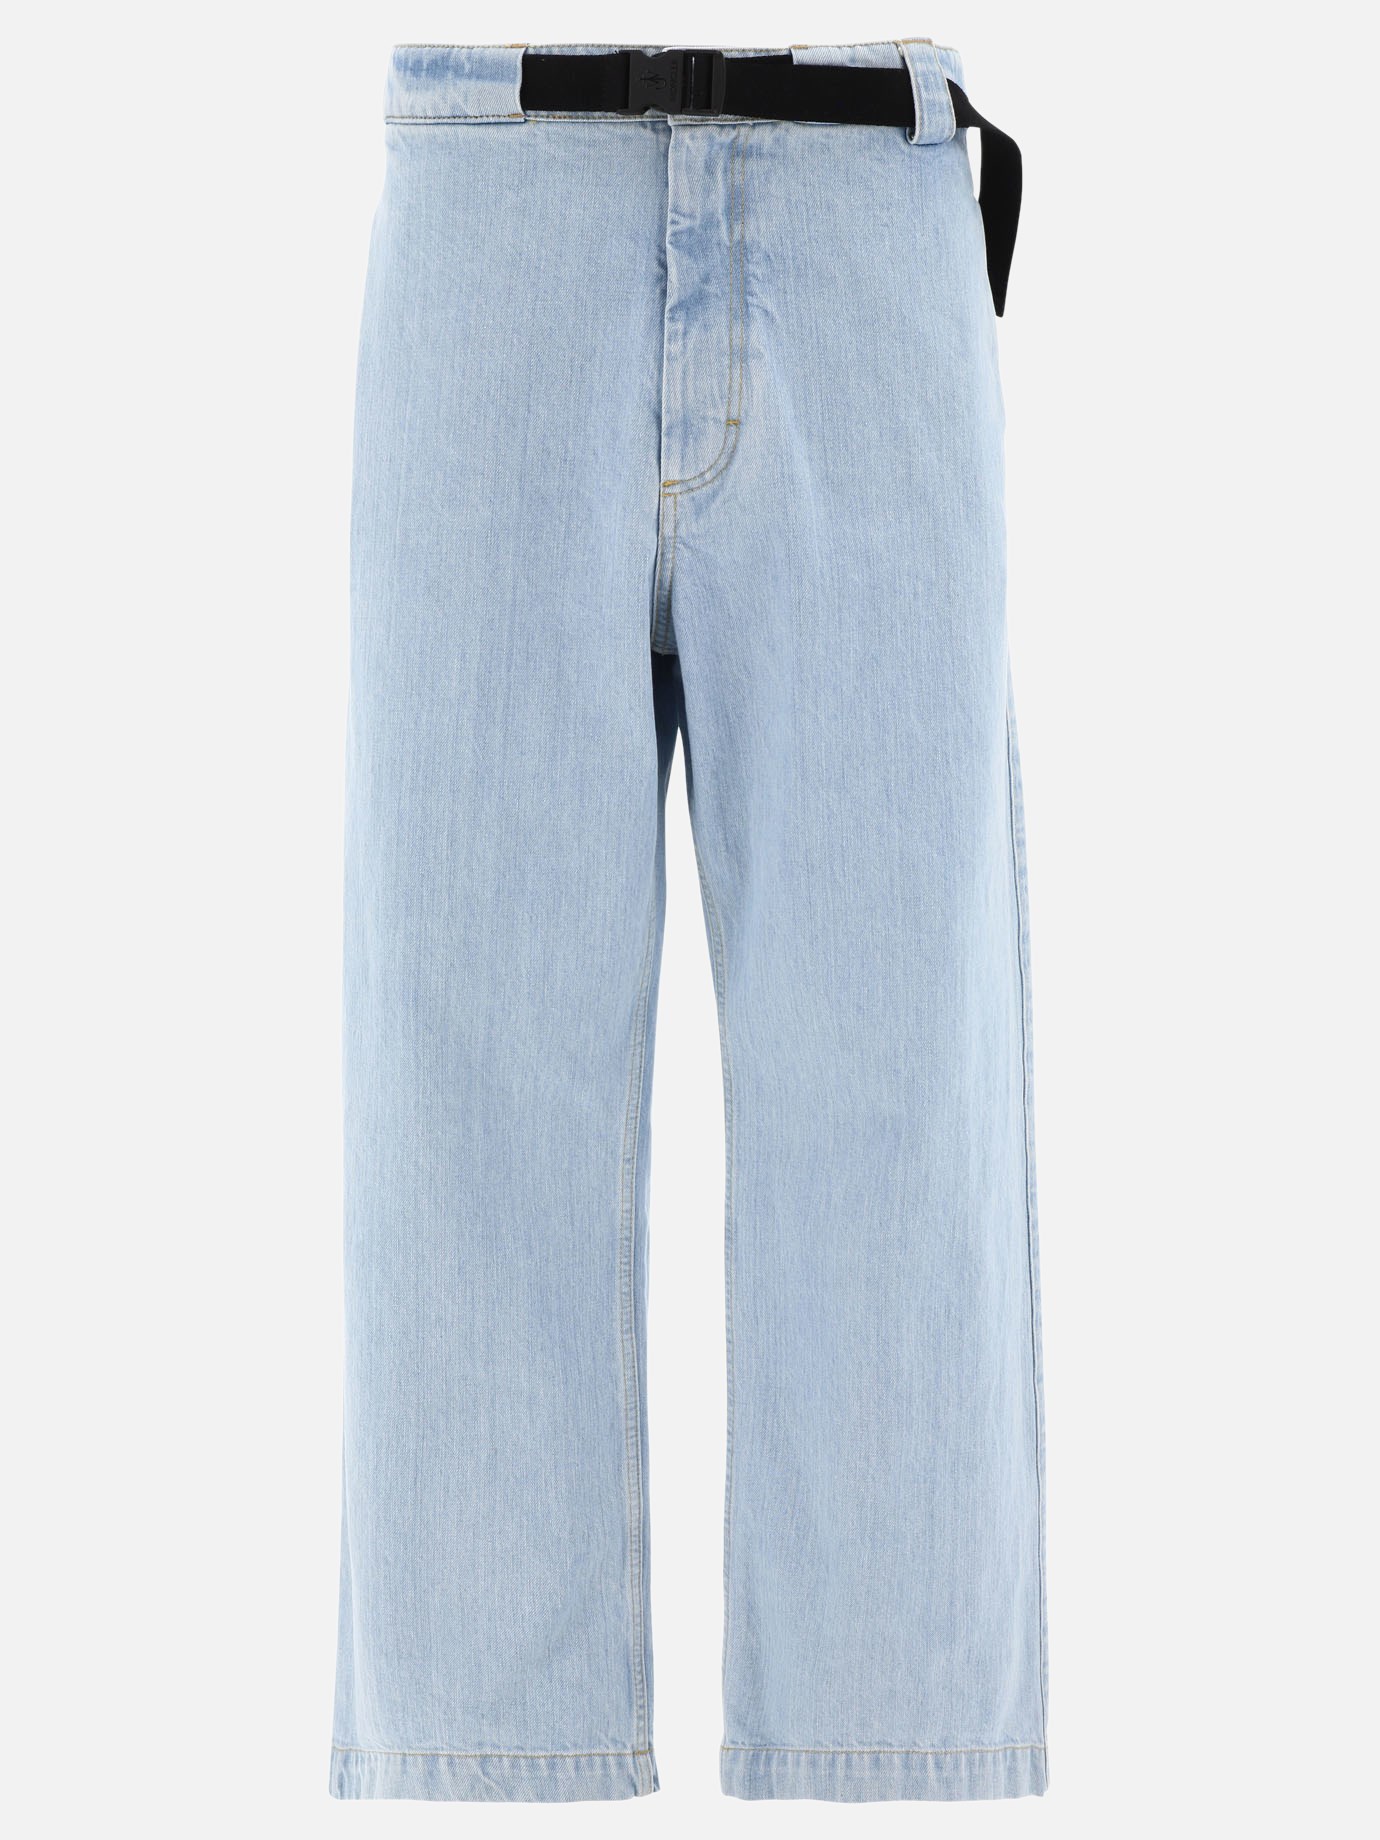  JW Anderson jeans by Moncler Genius - 0